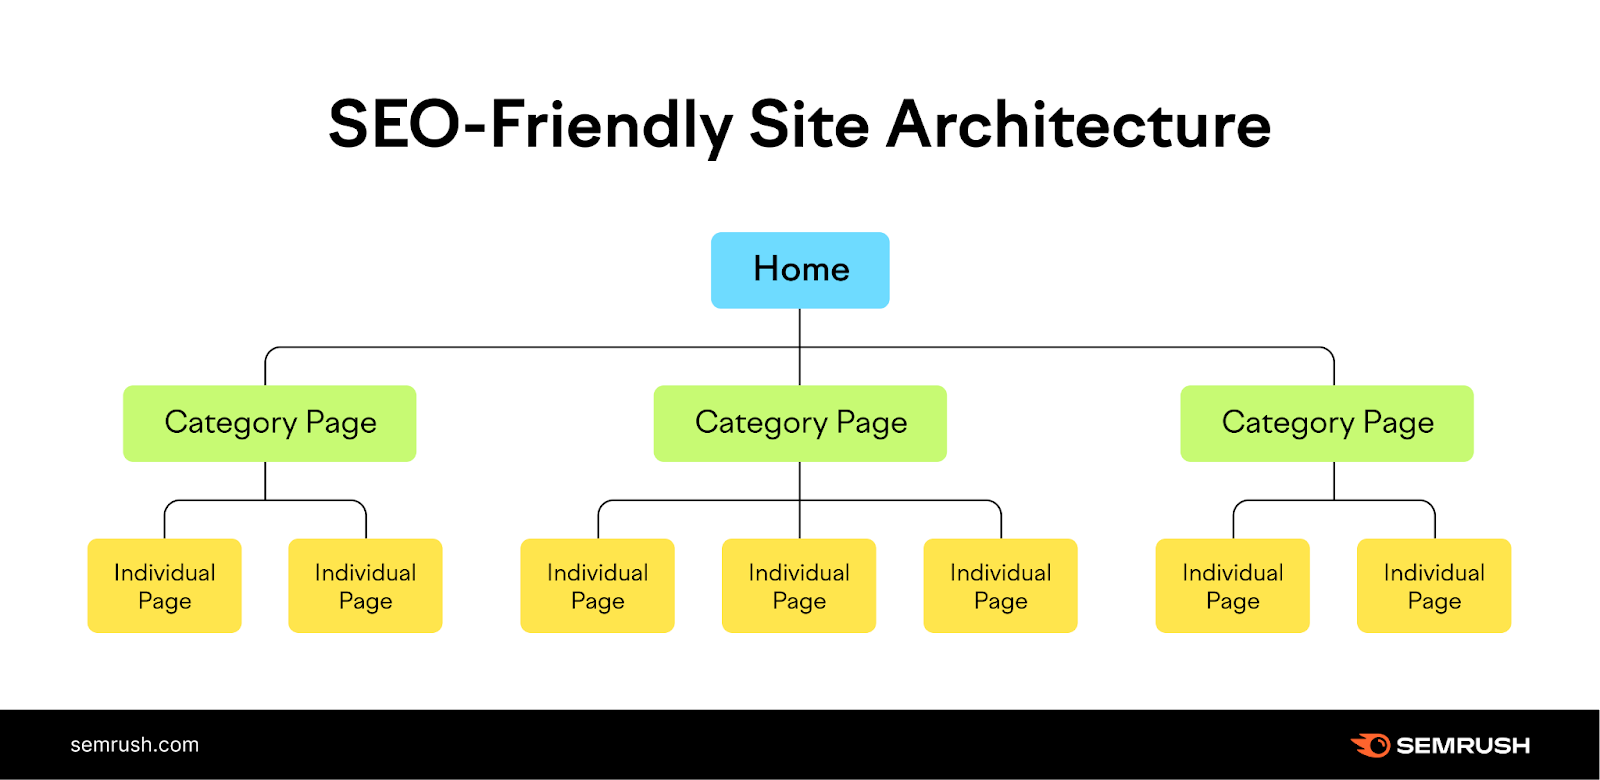 An illustration showing an SEO-friendly site architecture